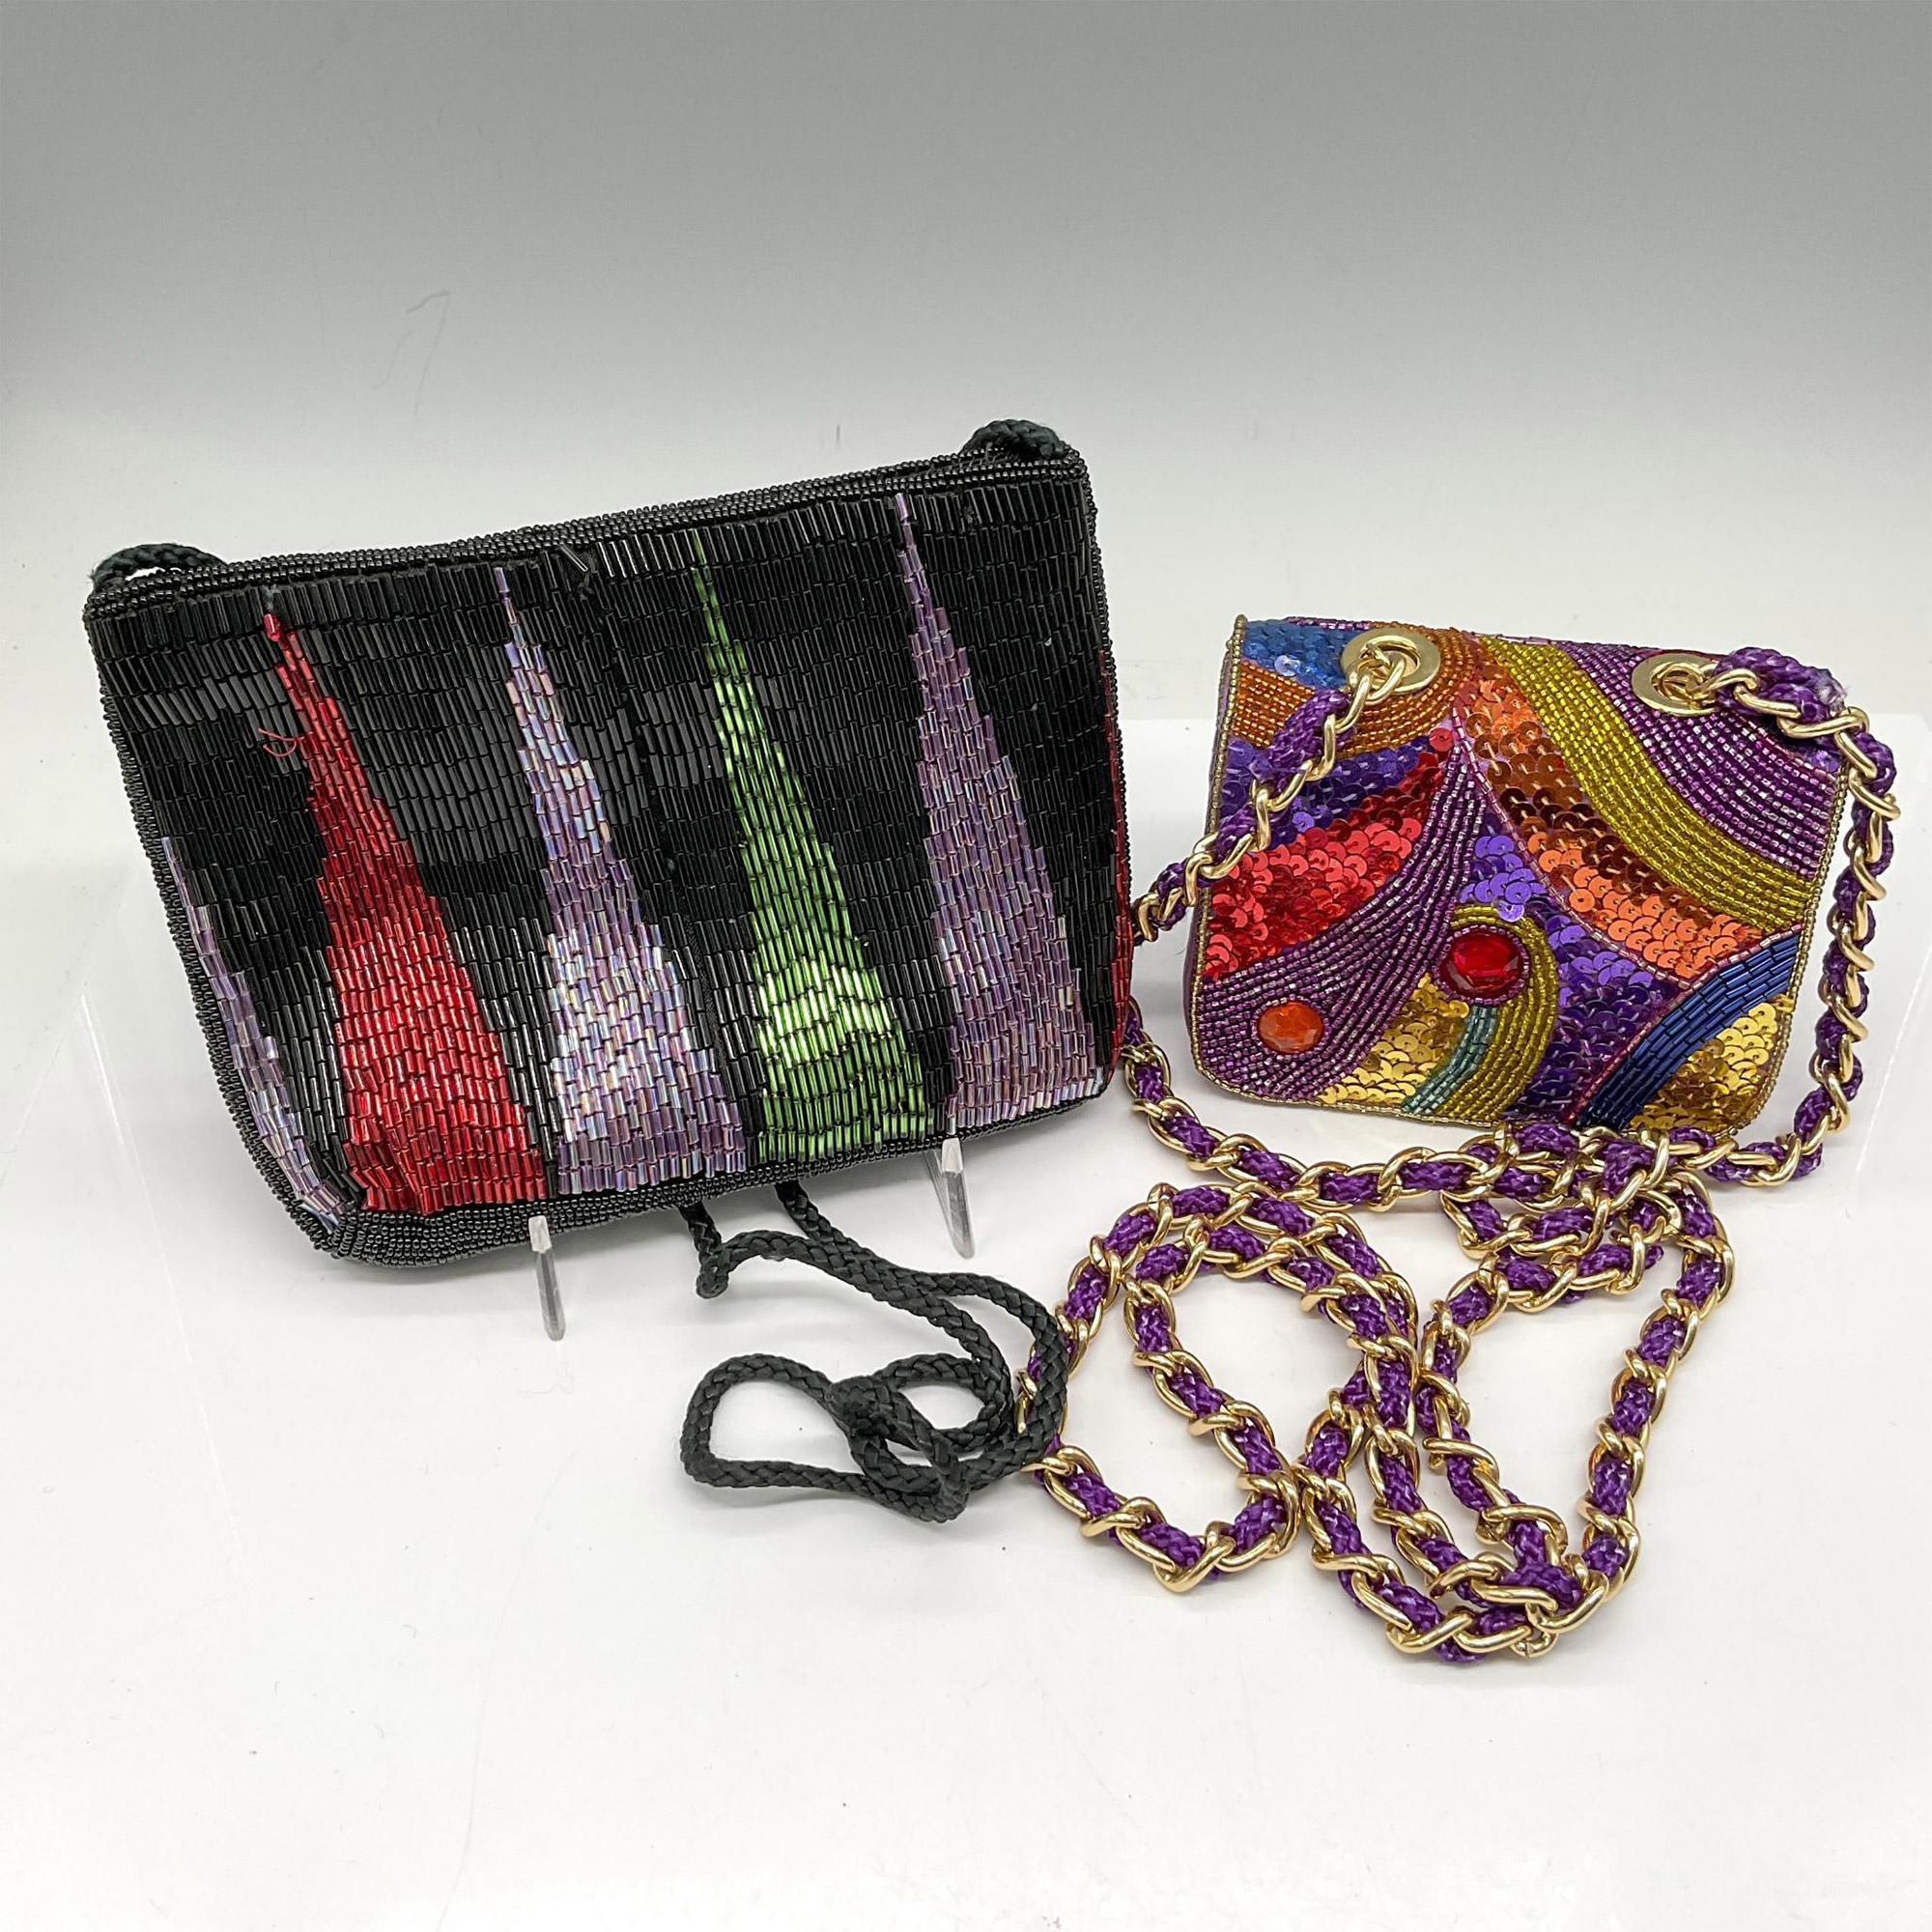 2pc Beaded Evening Shoulder Bags - Image 2 of 2